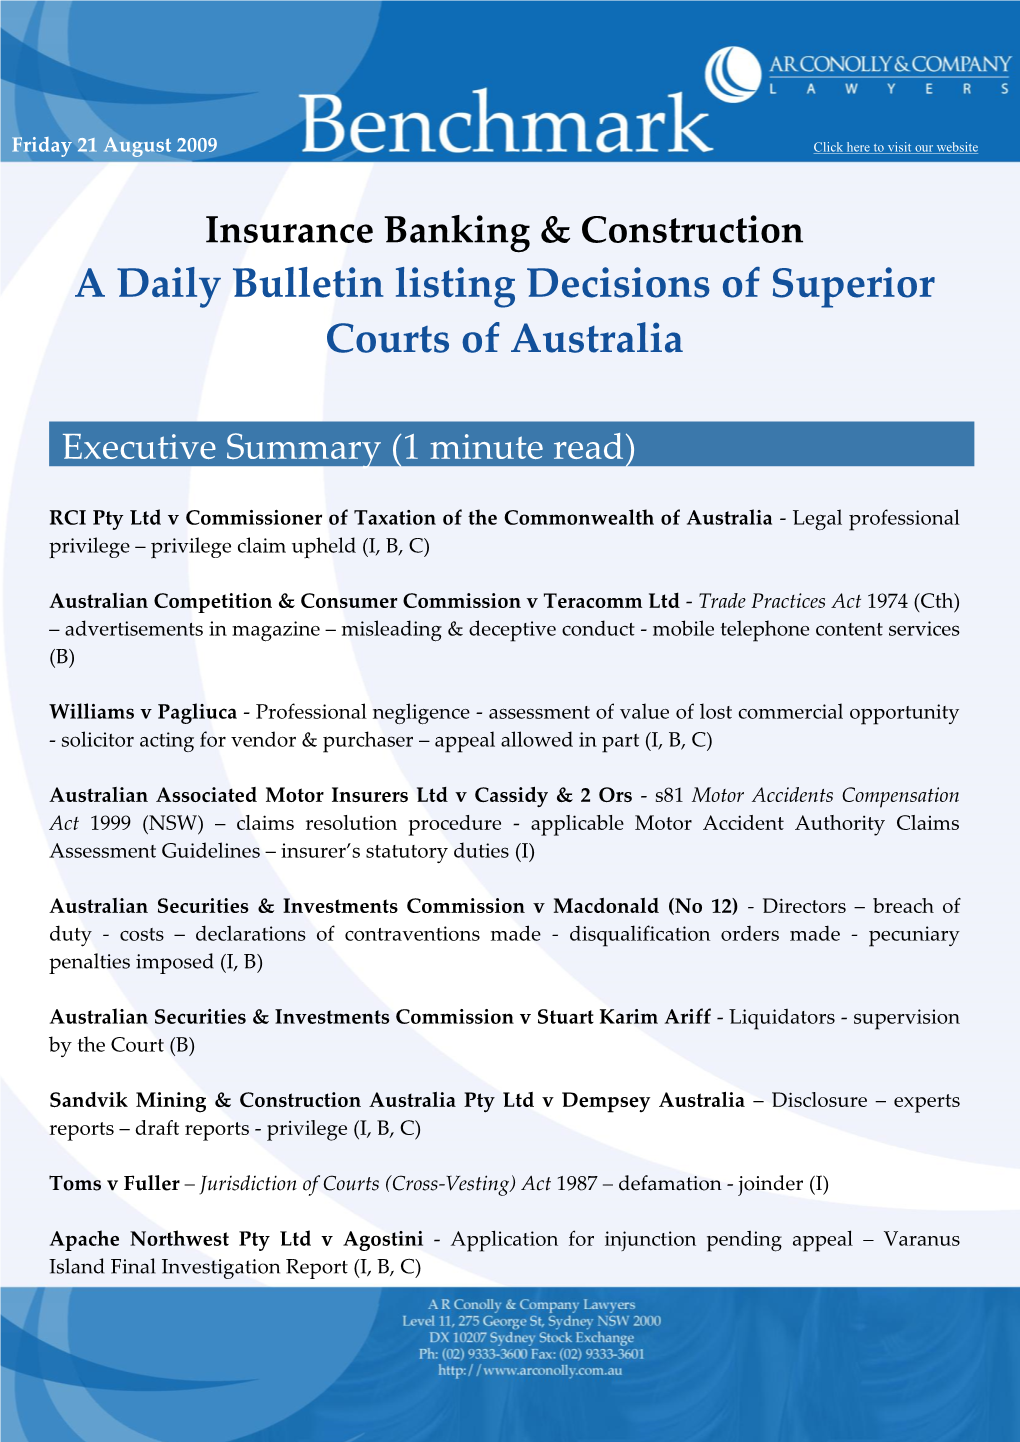 A Daily Bulletin Listing Decisions of Superior Courts of Australia